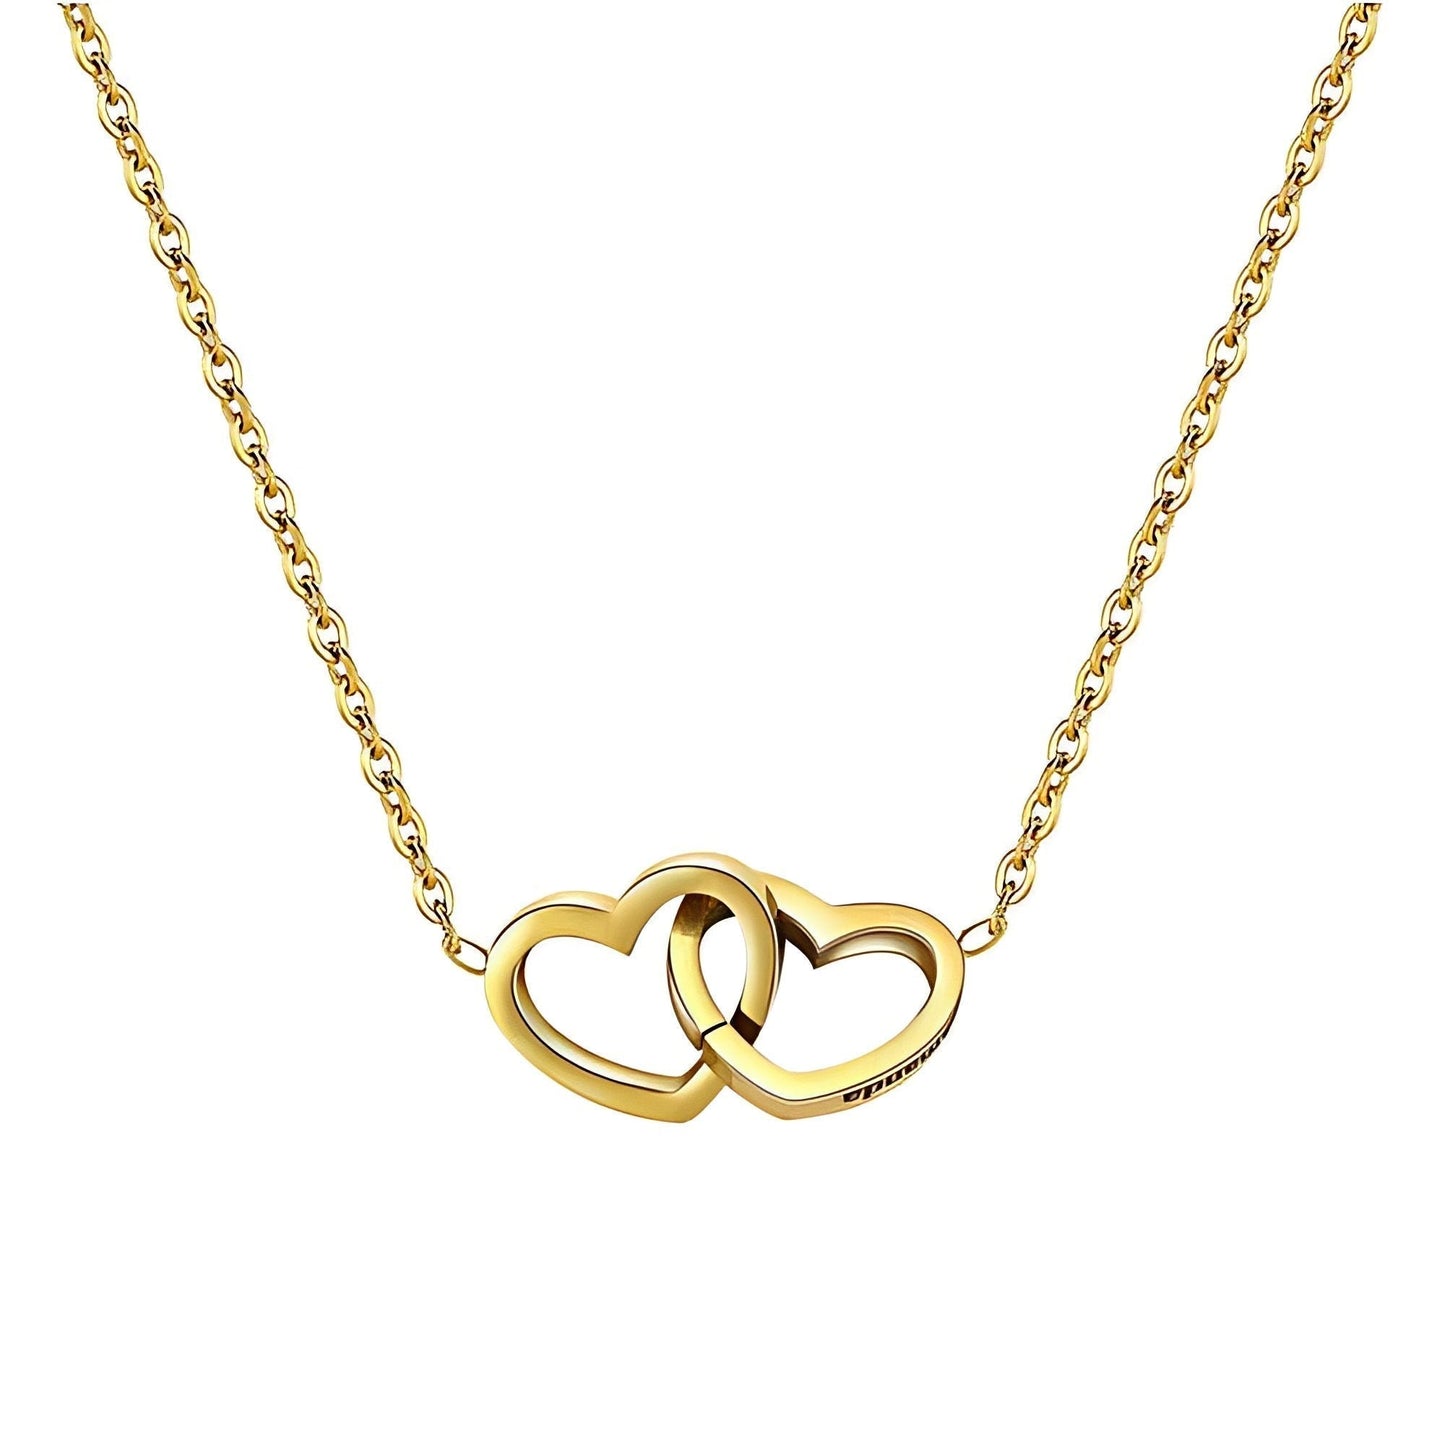 Personalizable double heart necklace